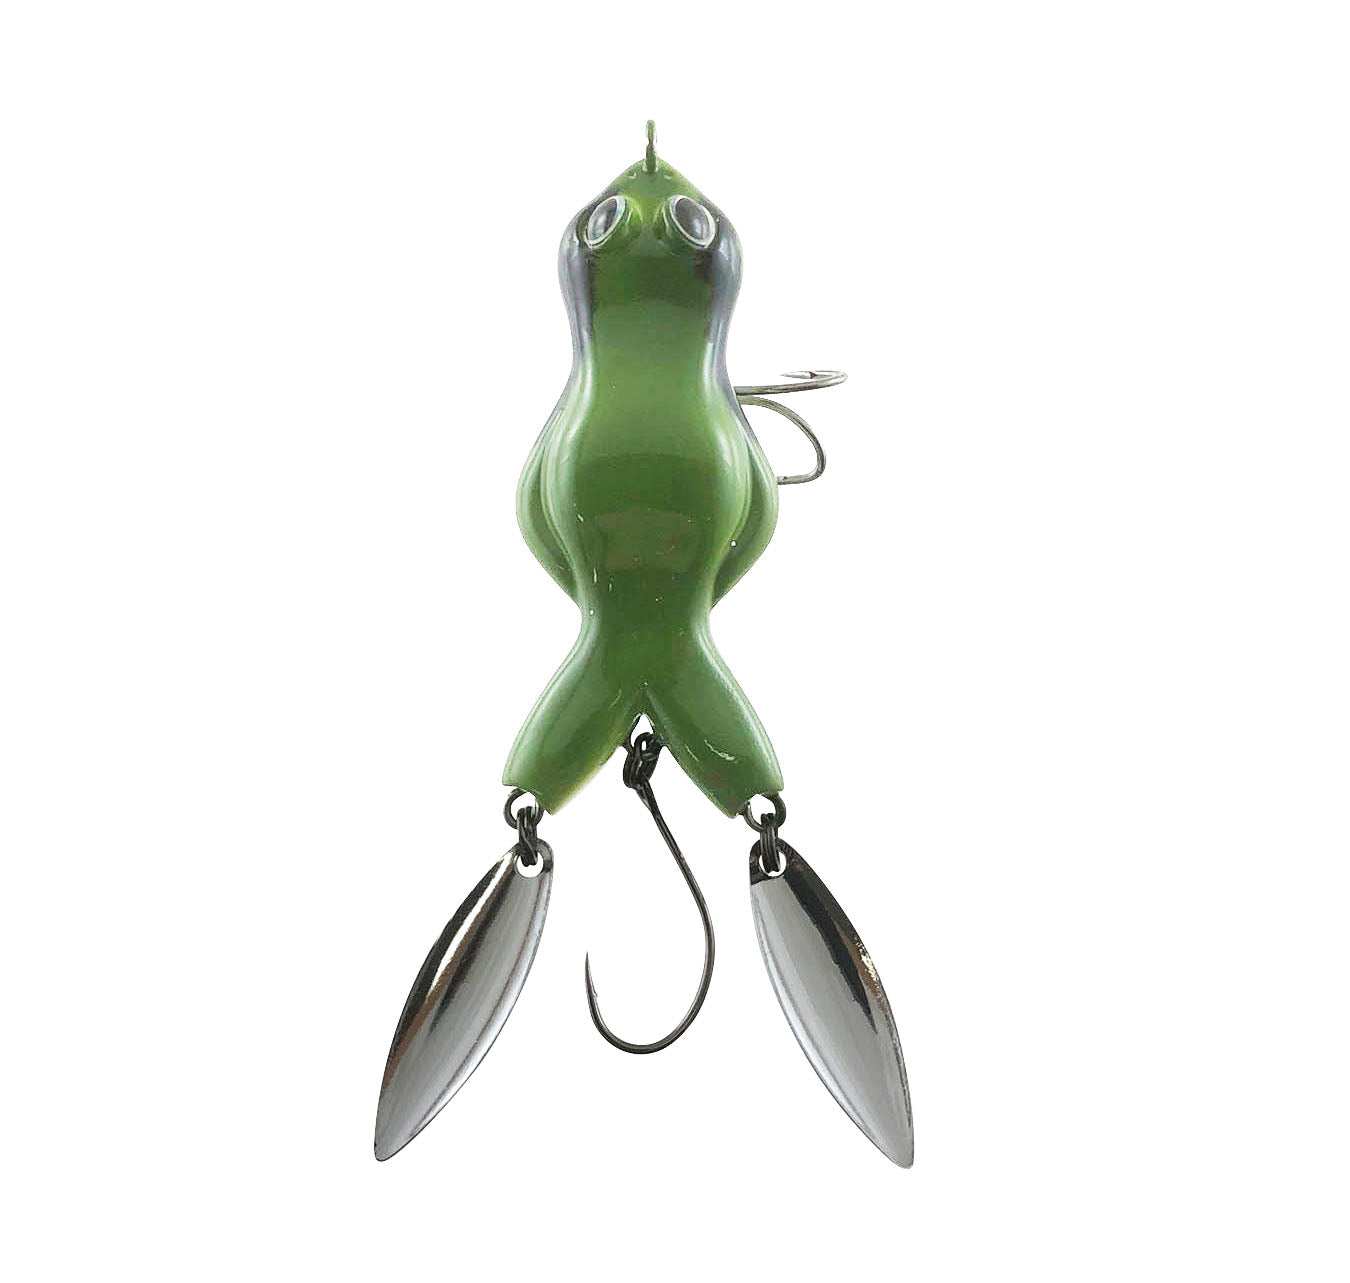 Bass Lures - Fergo's Tackle World